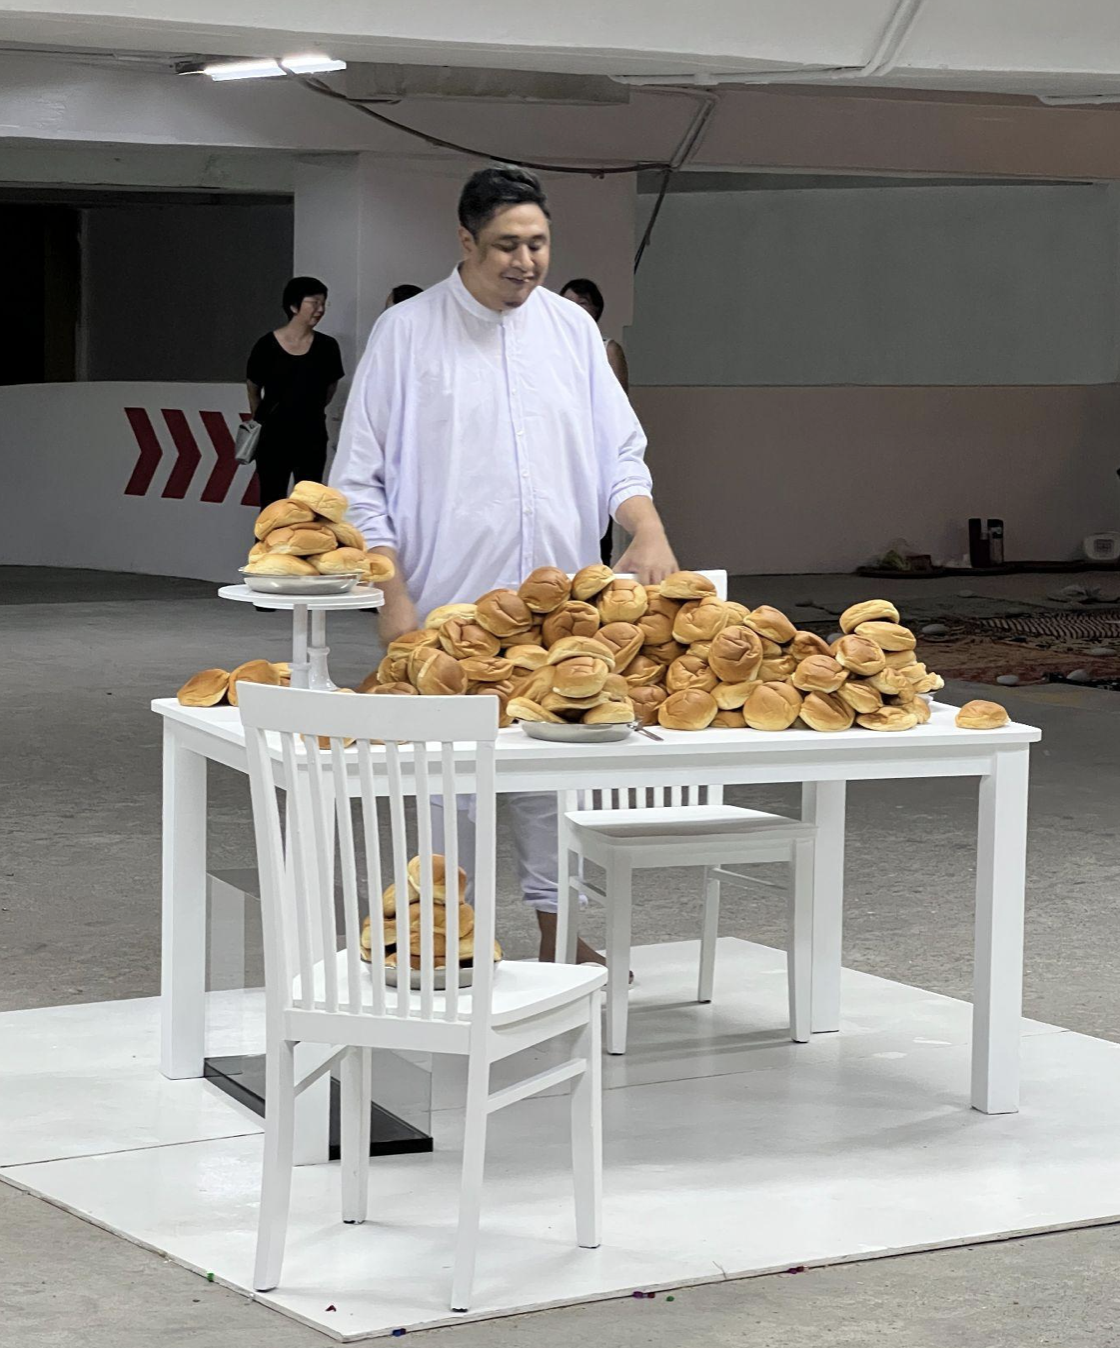 Commissioned artist, Ezzam Rahman activating his site specific installation through a performance